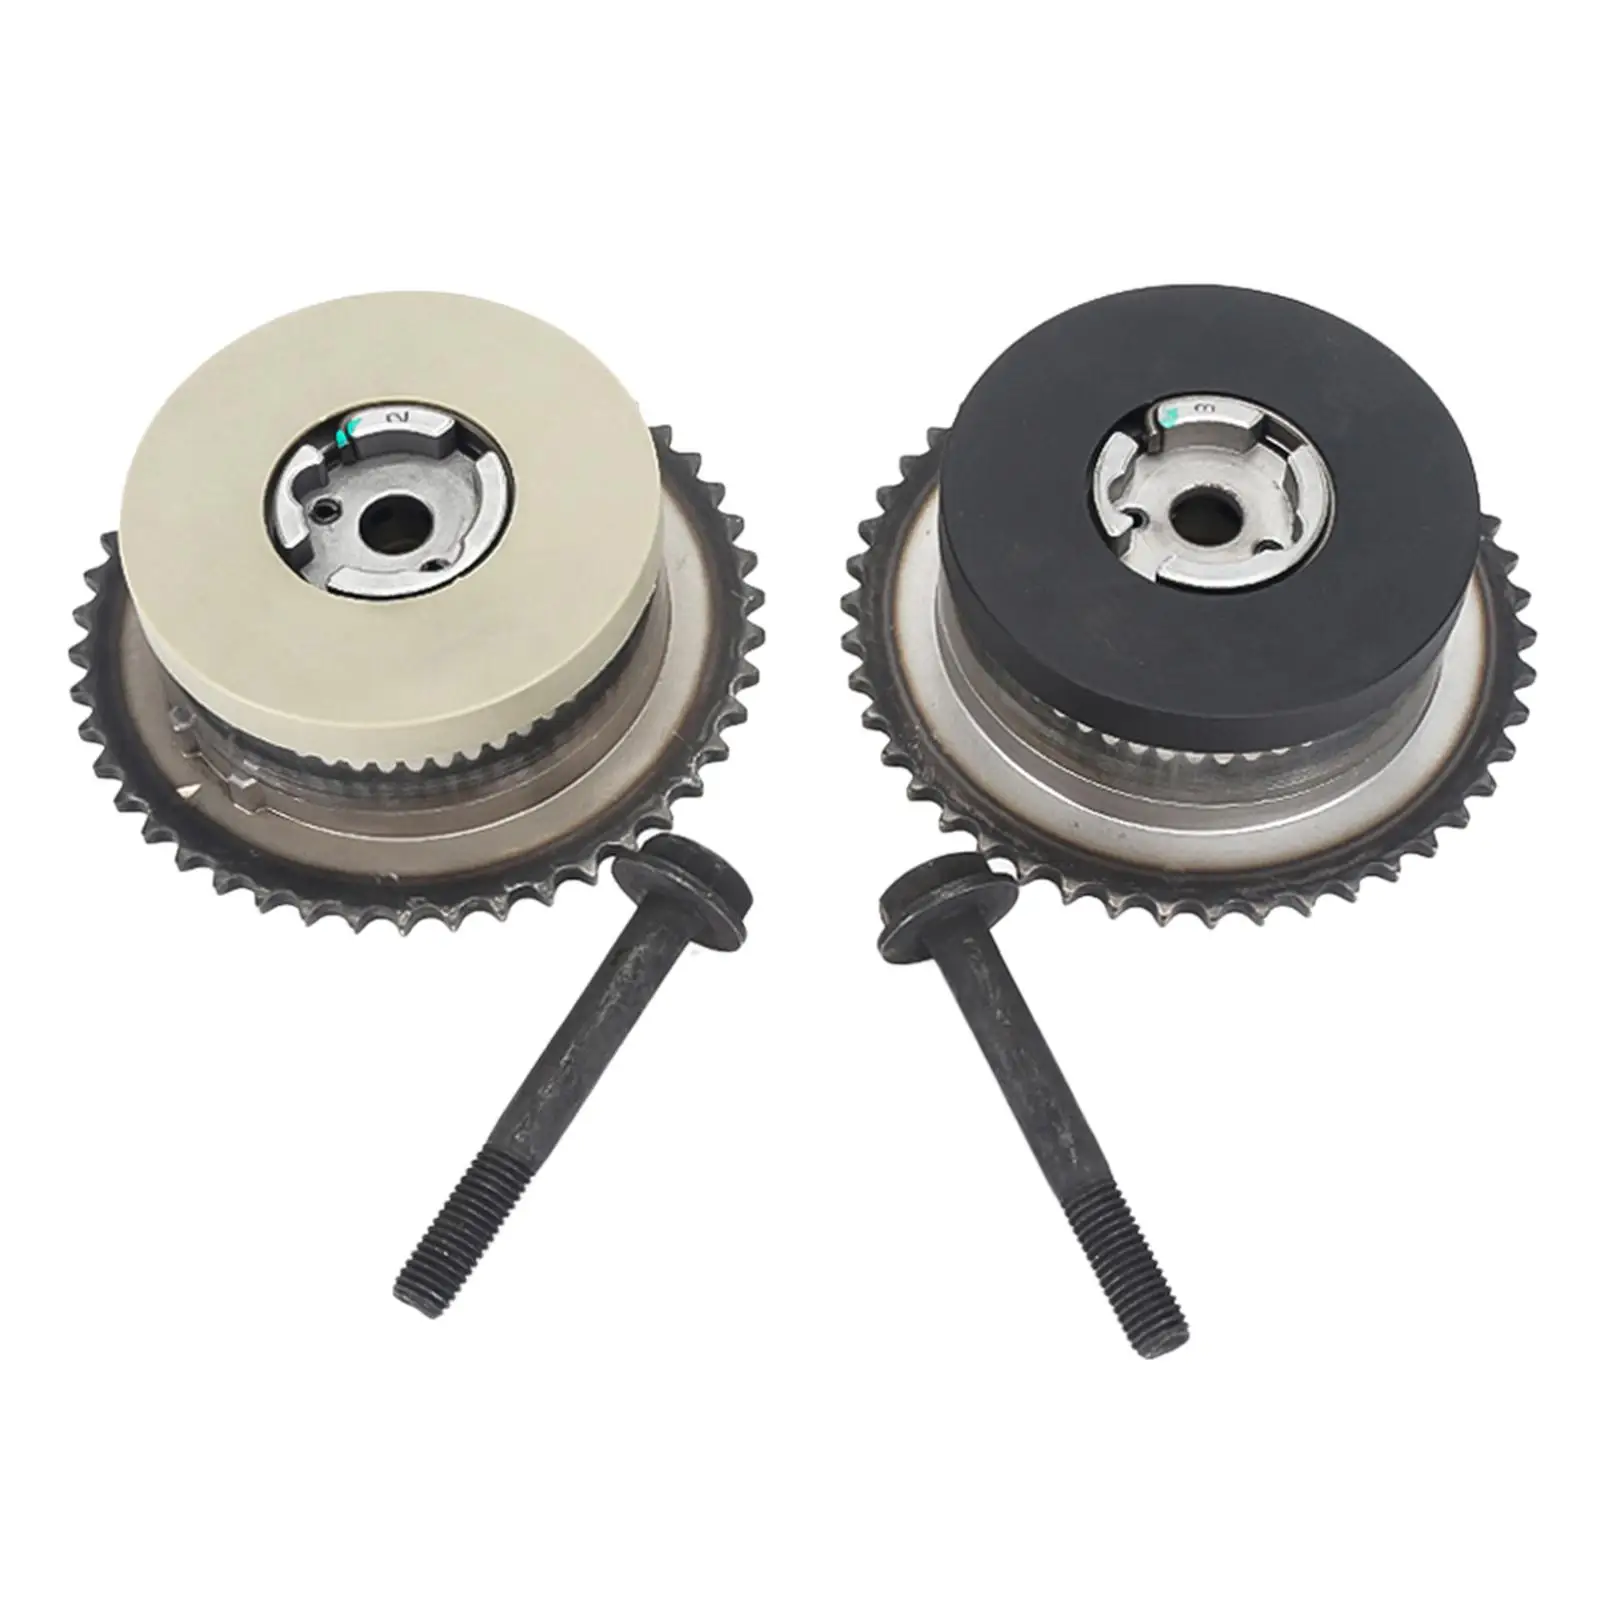 Pair Timing Chain Cam Camshaft Phaser Gear for Lnf Ldk Lhu 2.0L Replaces